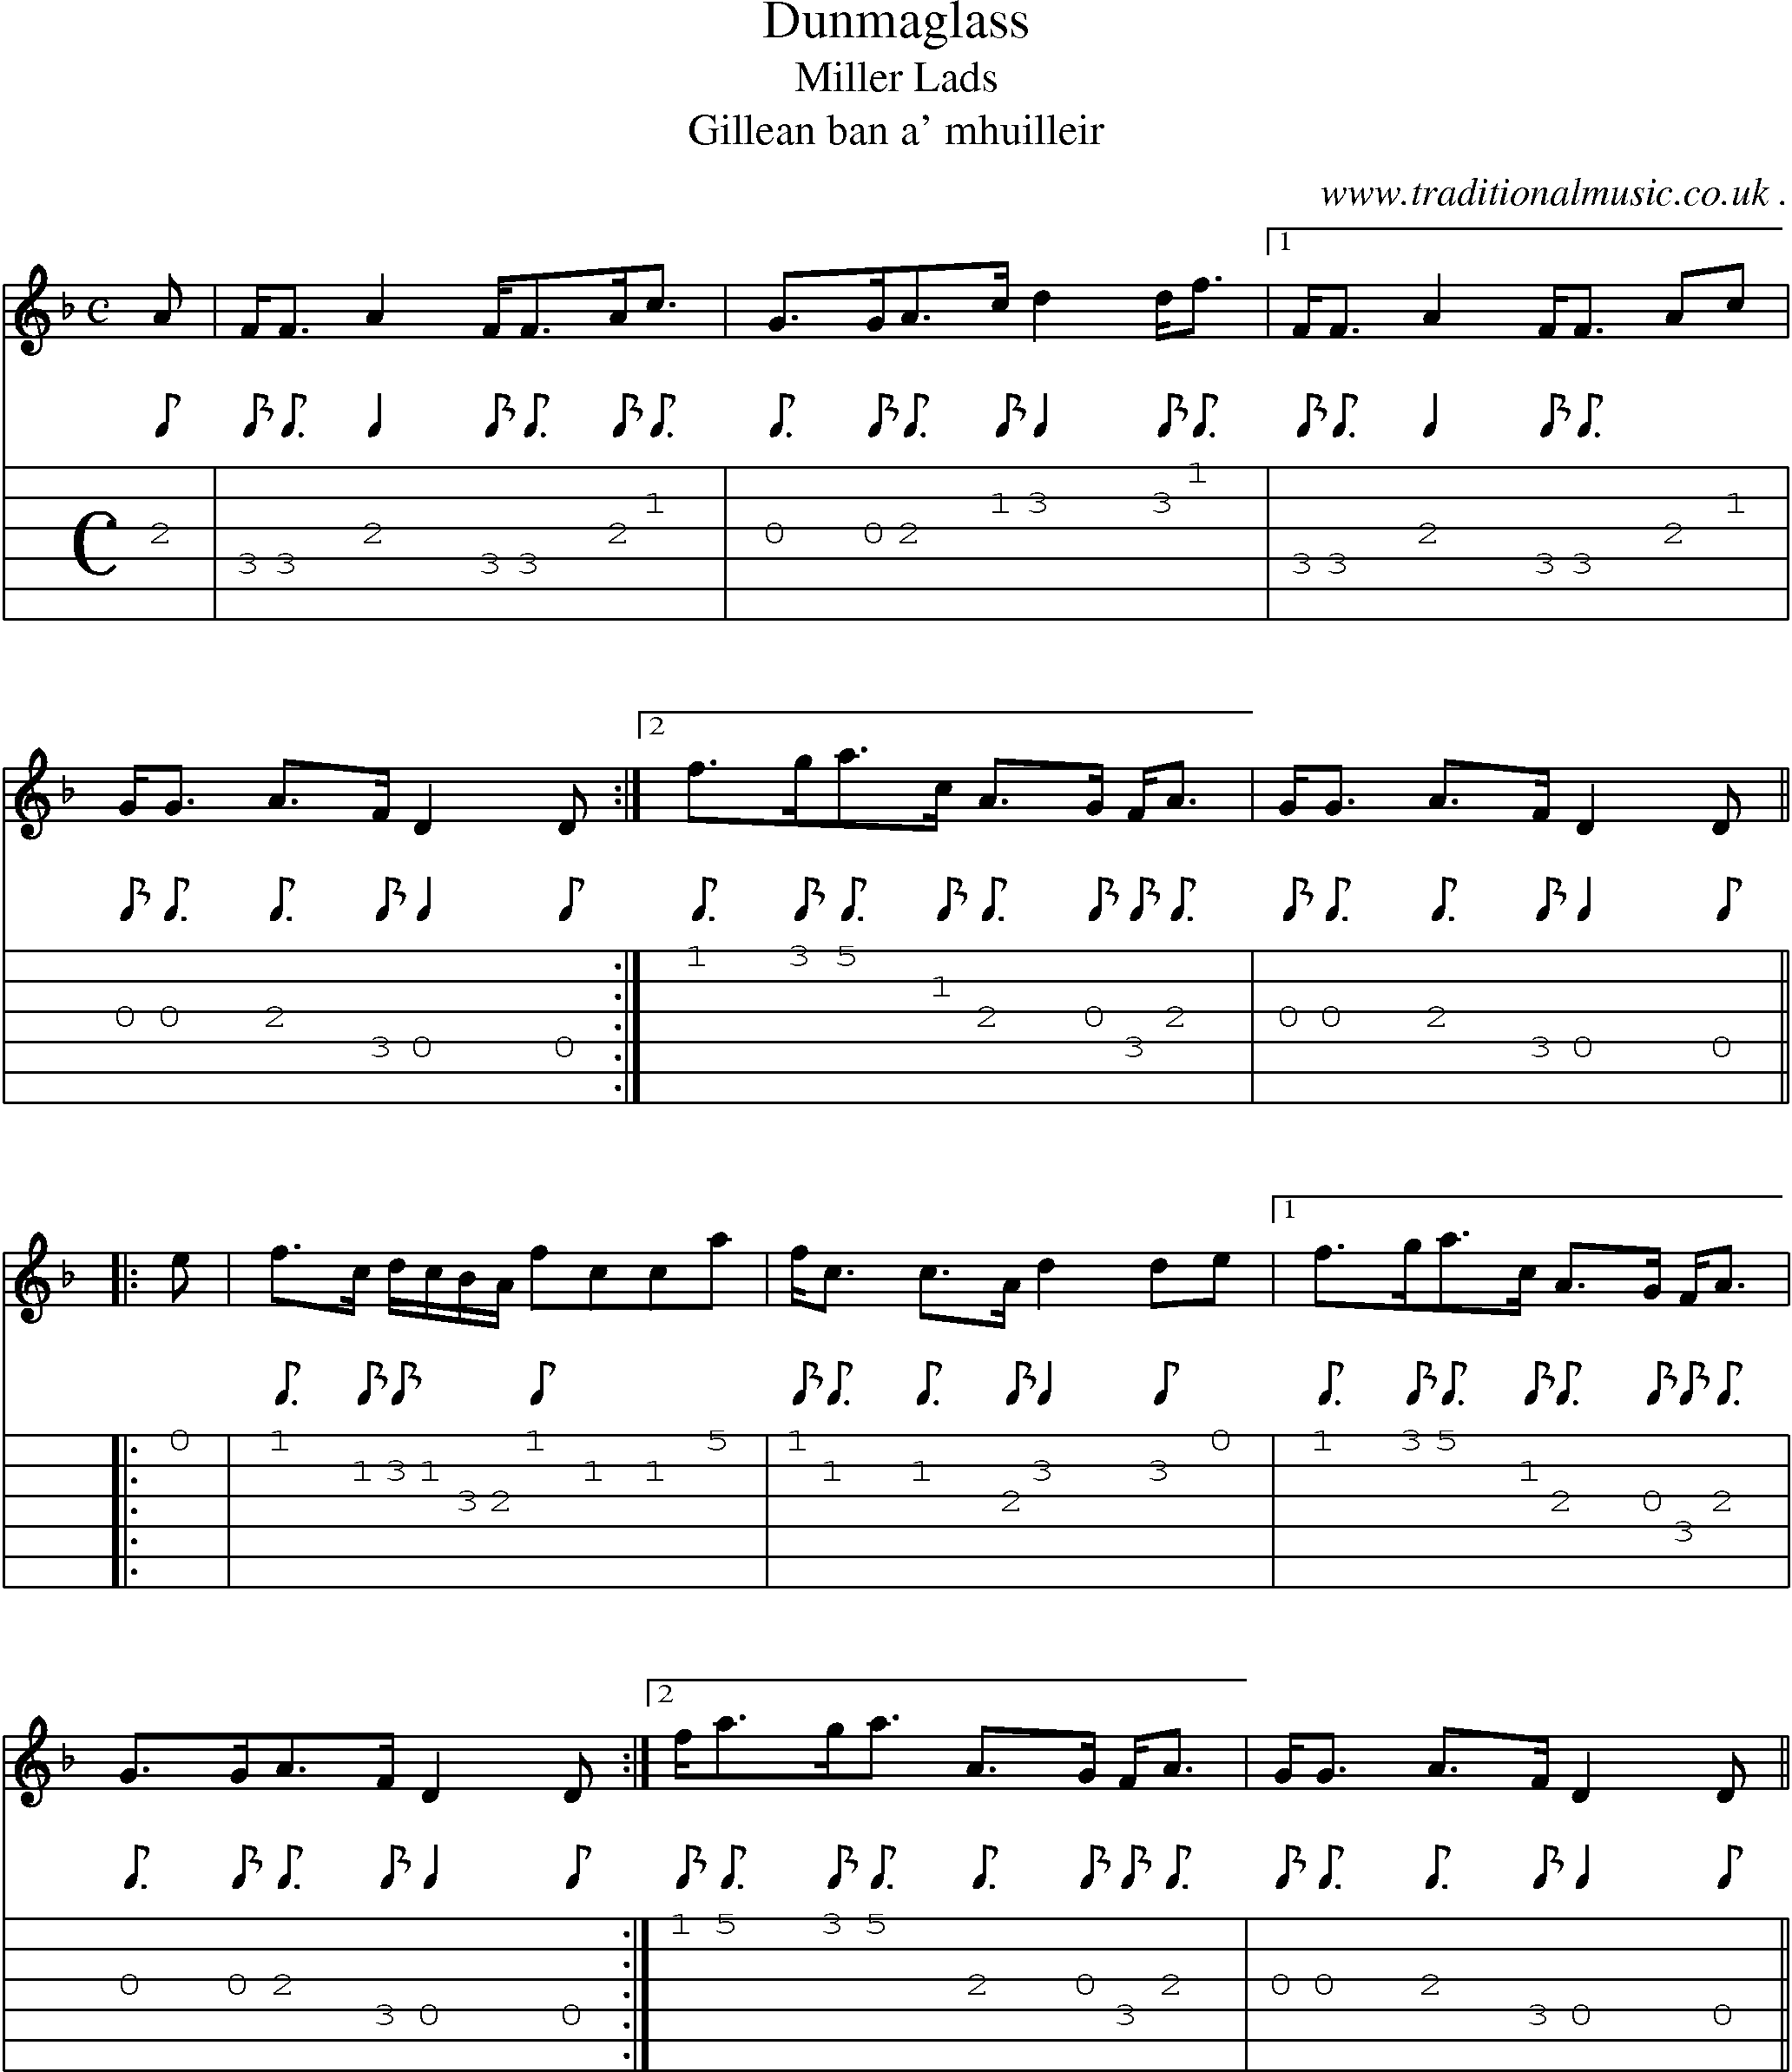 Sheet-music  score, Chords and Guitar Tabs for Dunmaglass